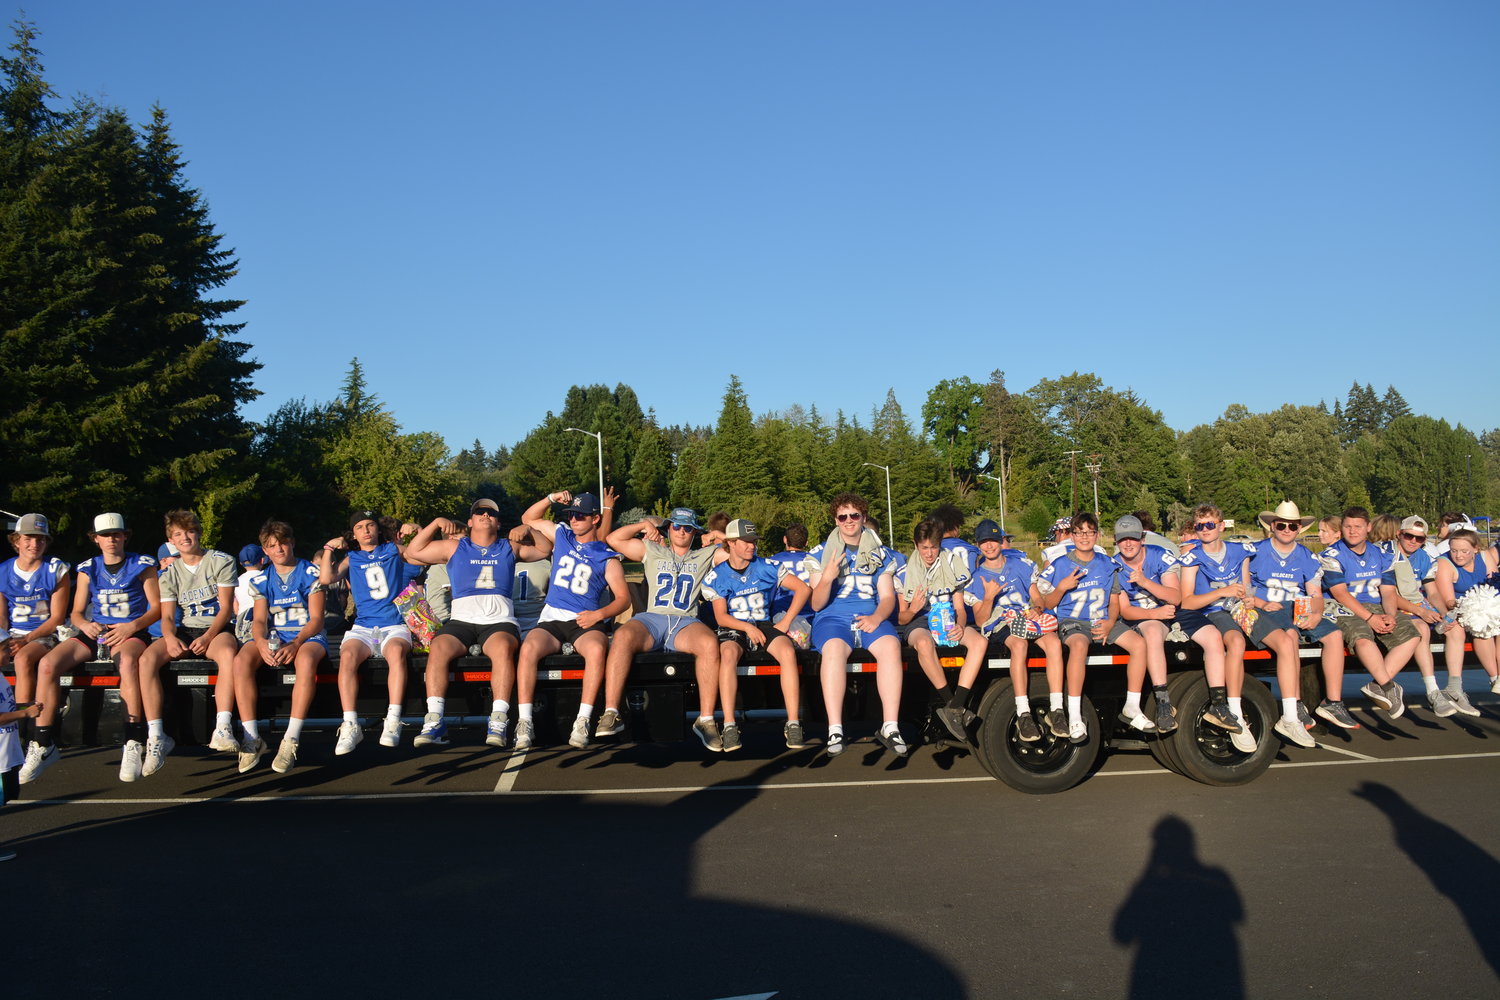 The La Center Wildcats football team poses for a photo before participating in the La Center Our Days parade on July 29.